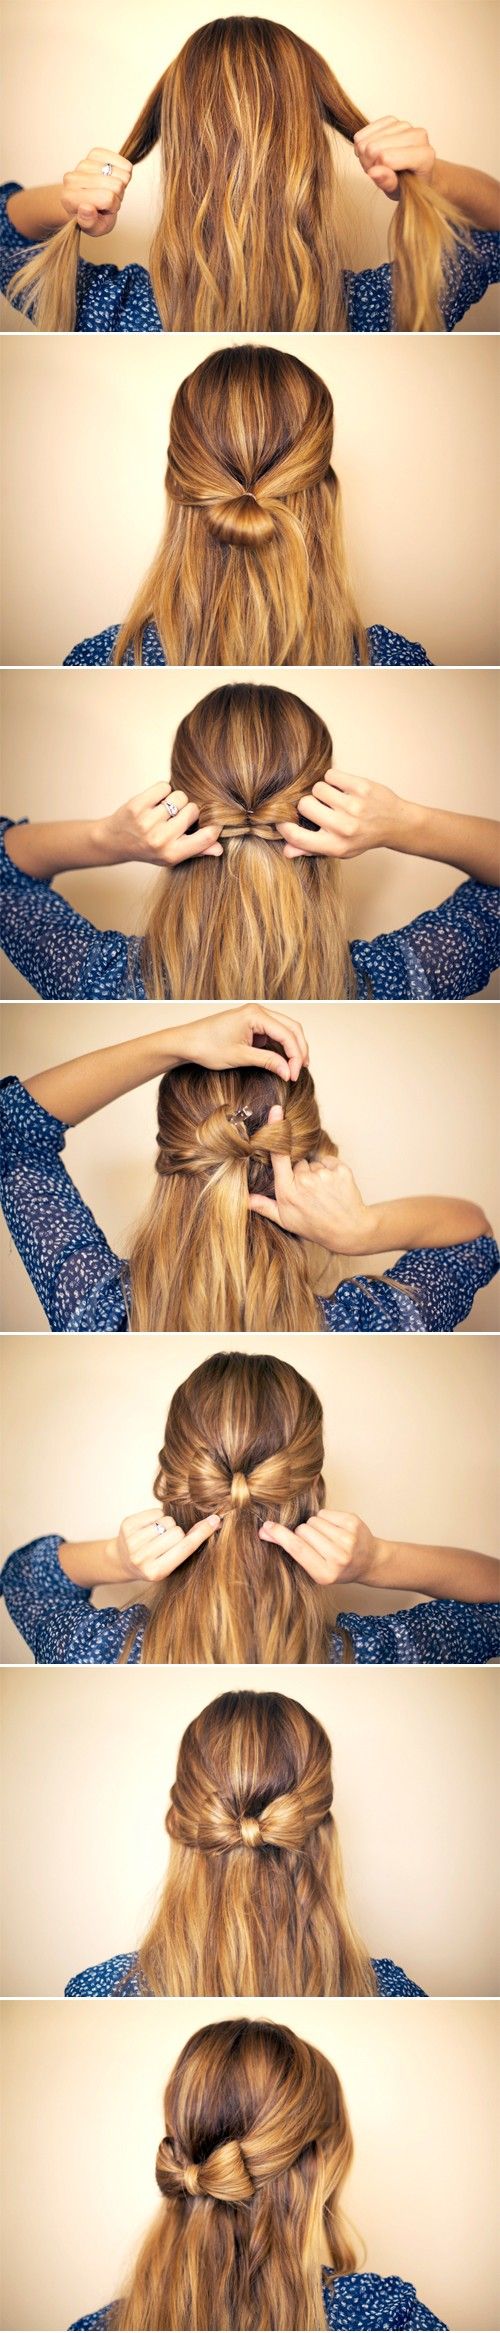 Cute bow with your hair!